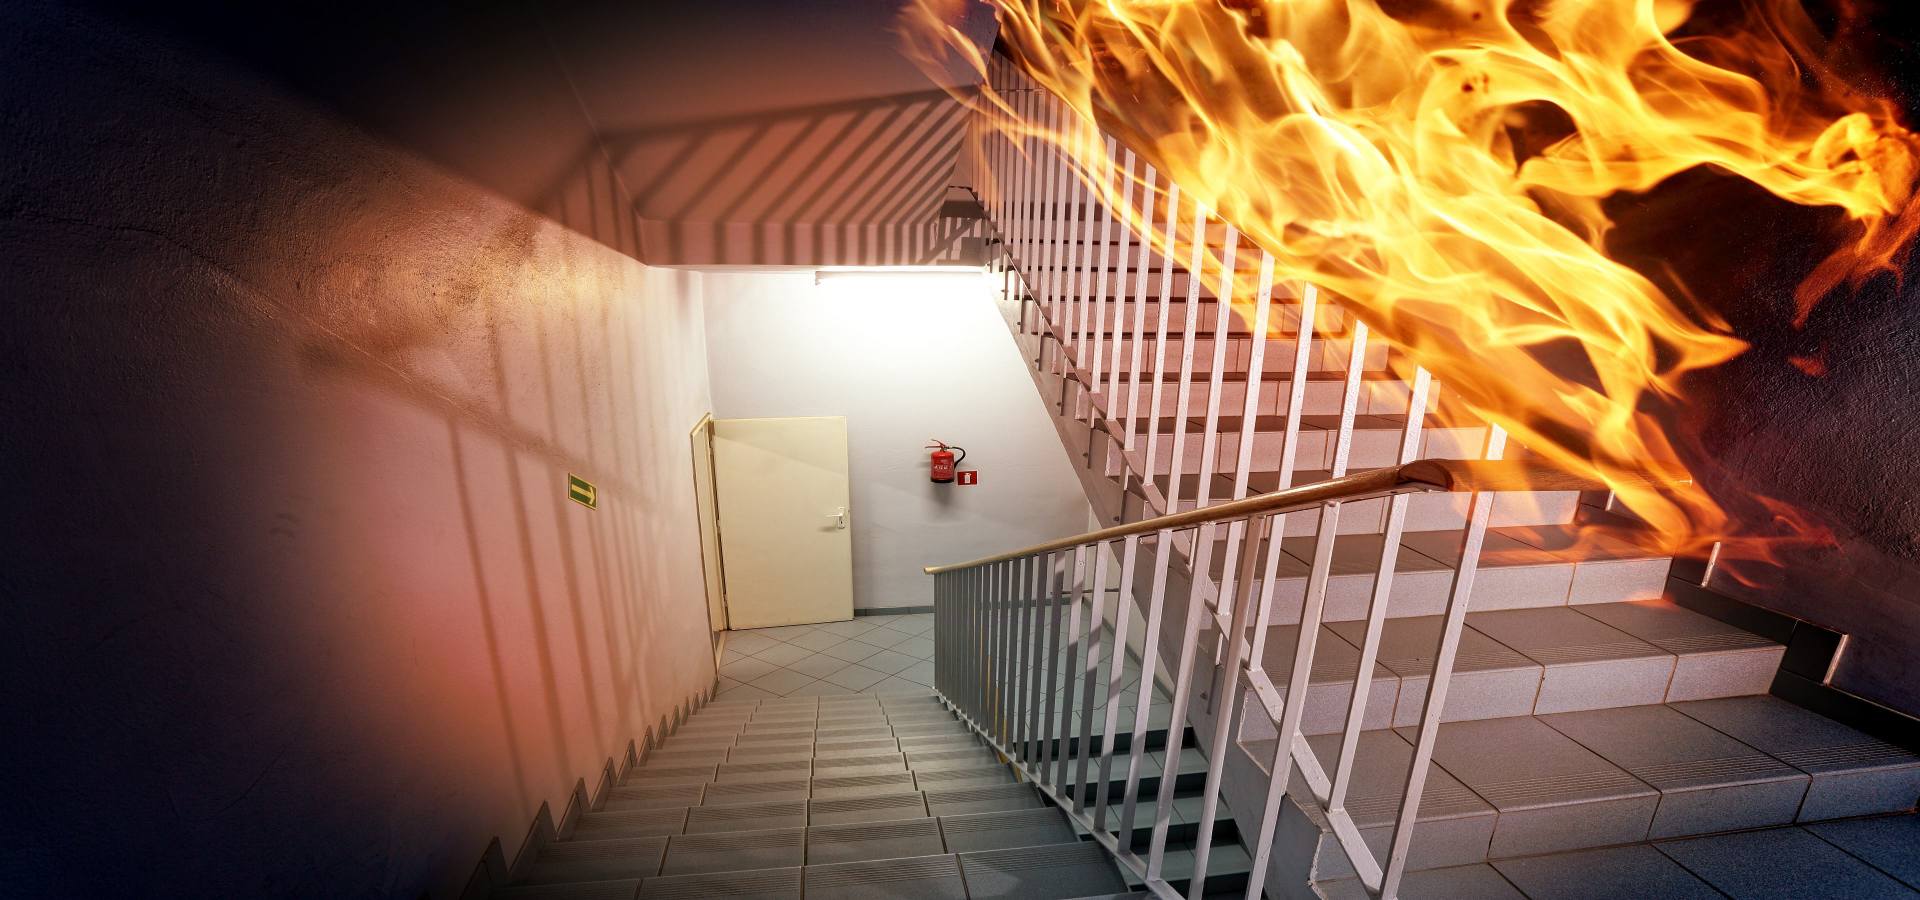 building stairs caught on fire showing a door and extinguisher